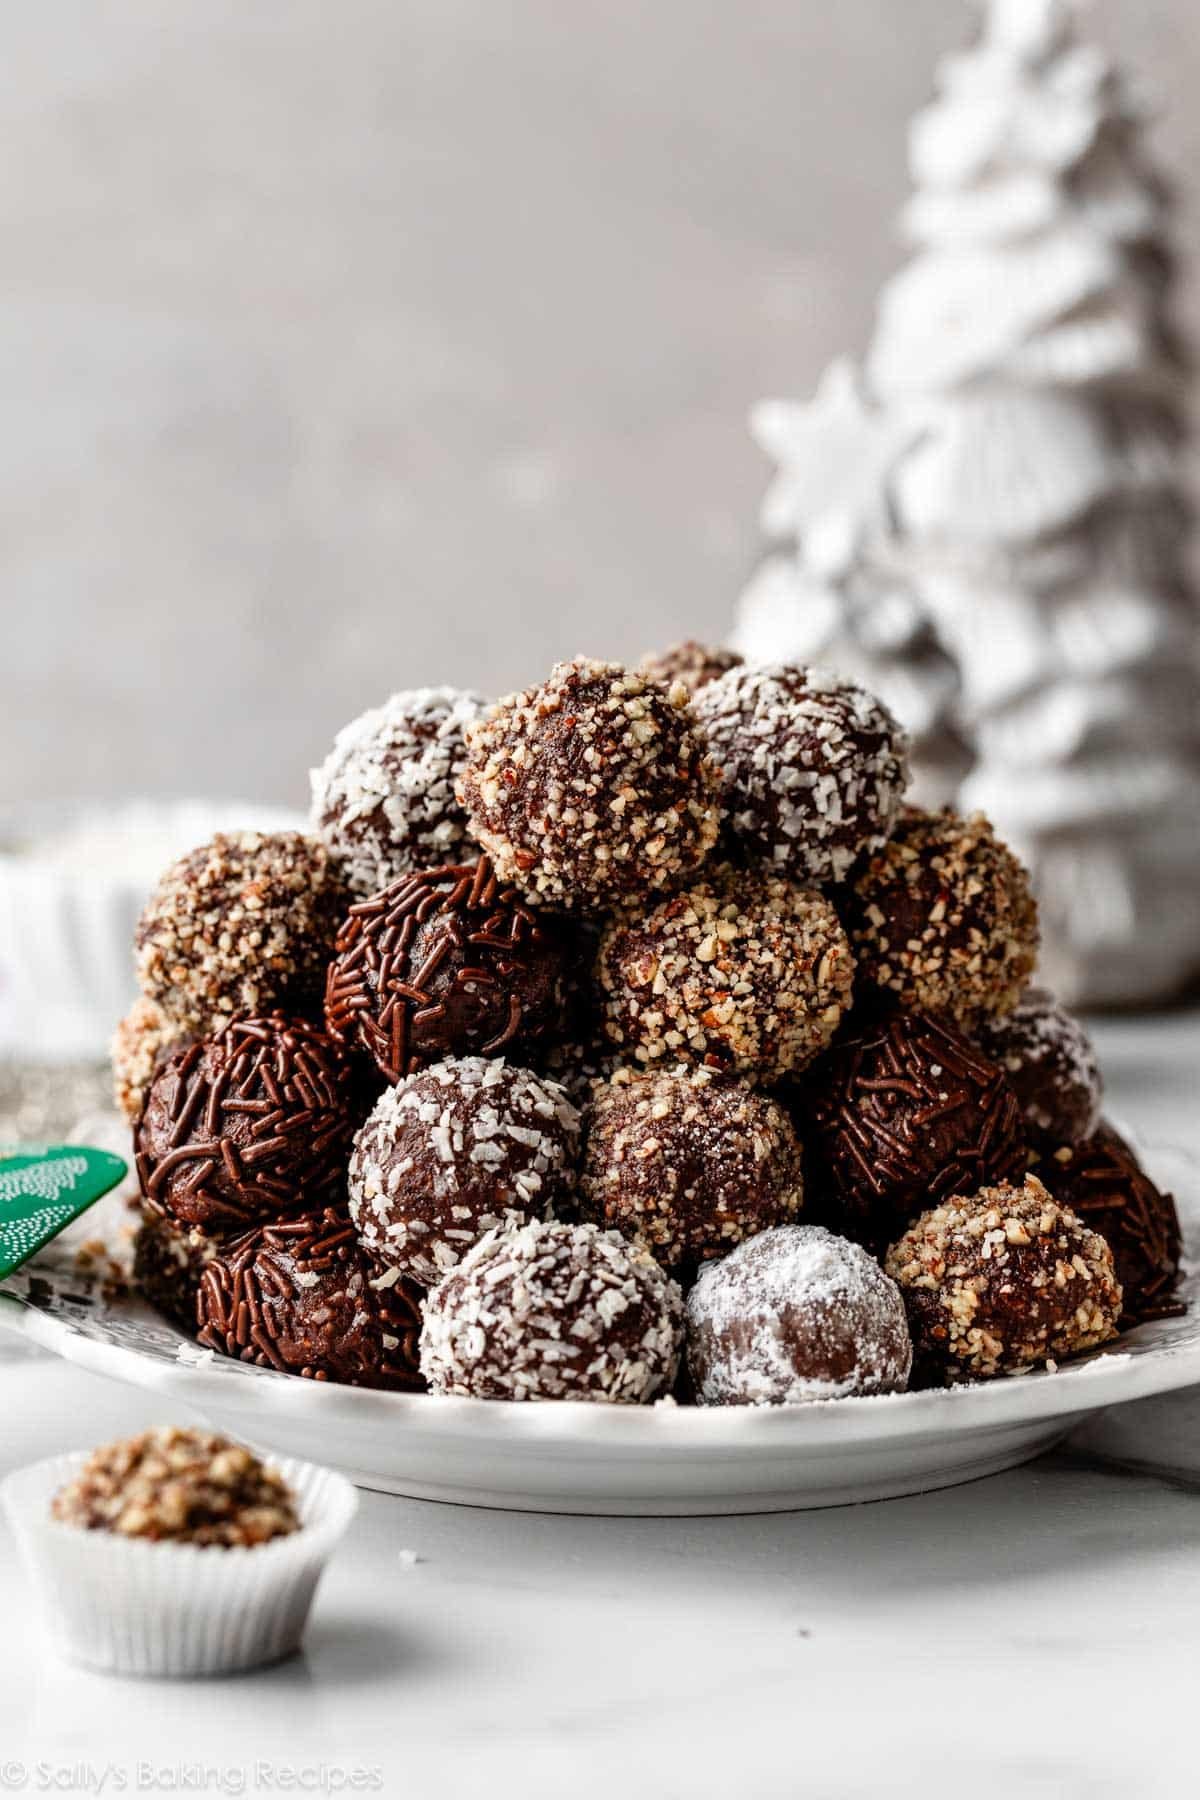 pile of rum balls coated in pecans, coconut, and chocolate sprinkles on white plate.